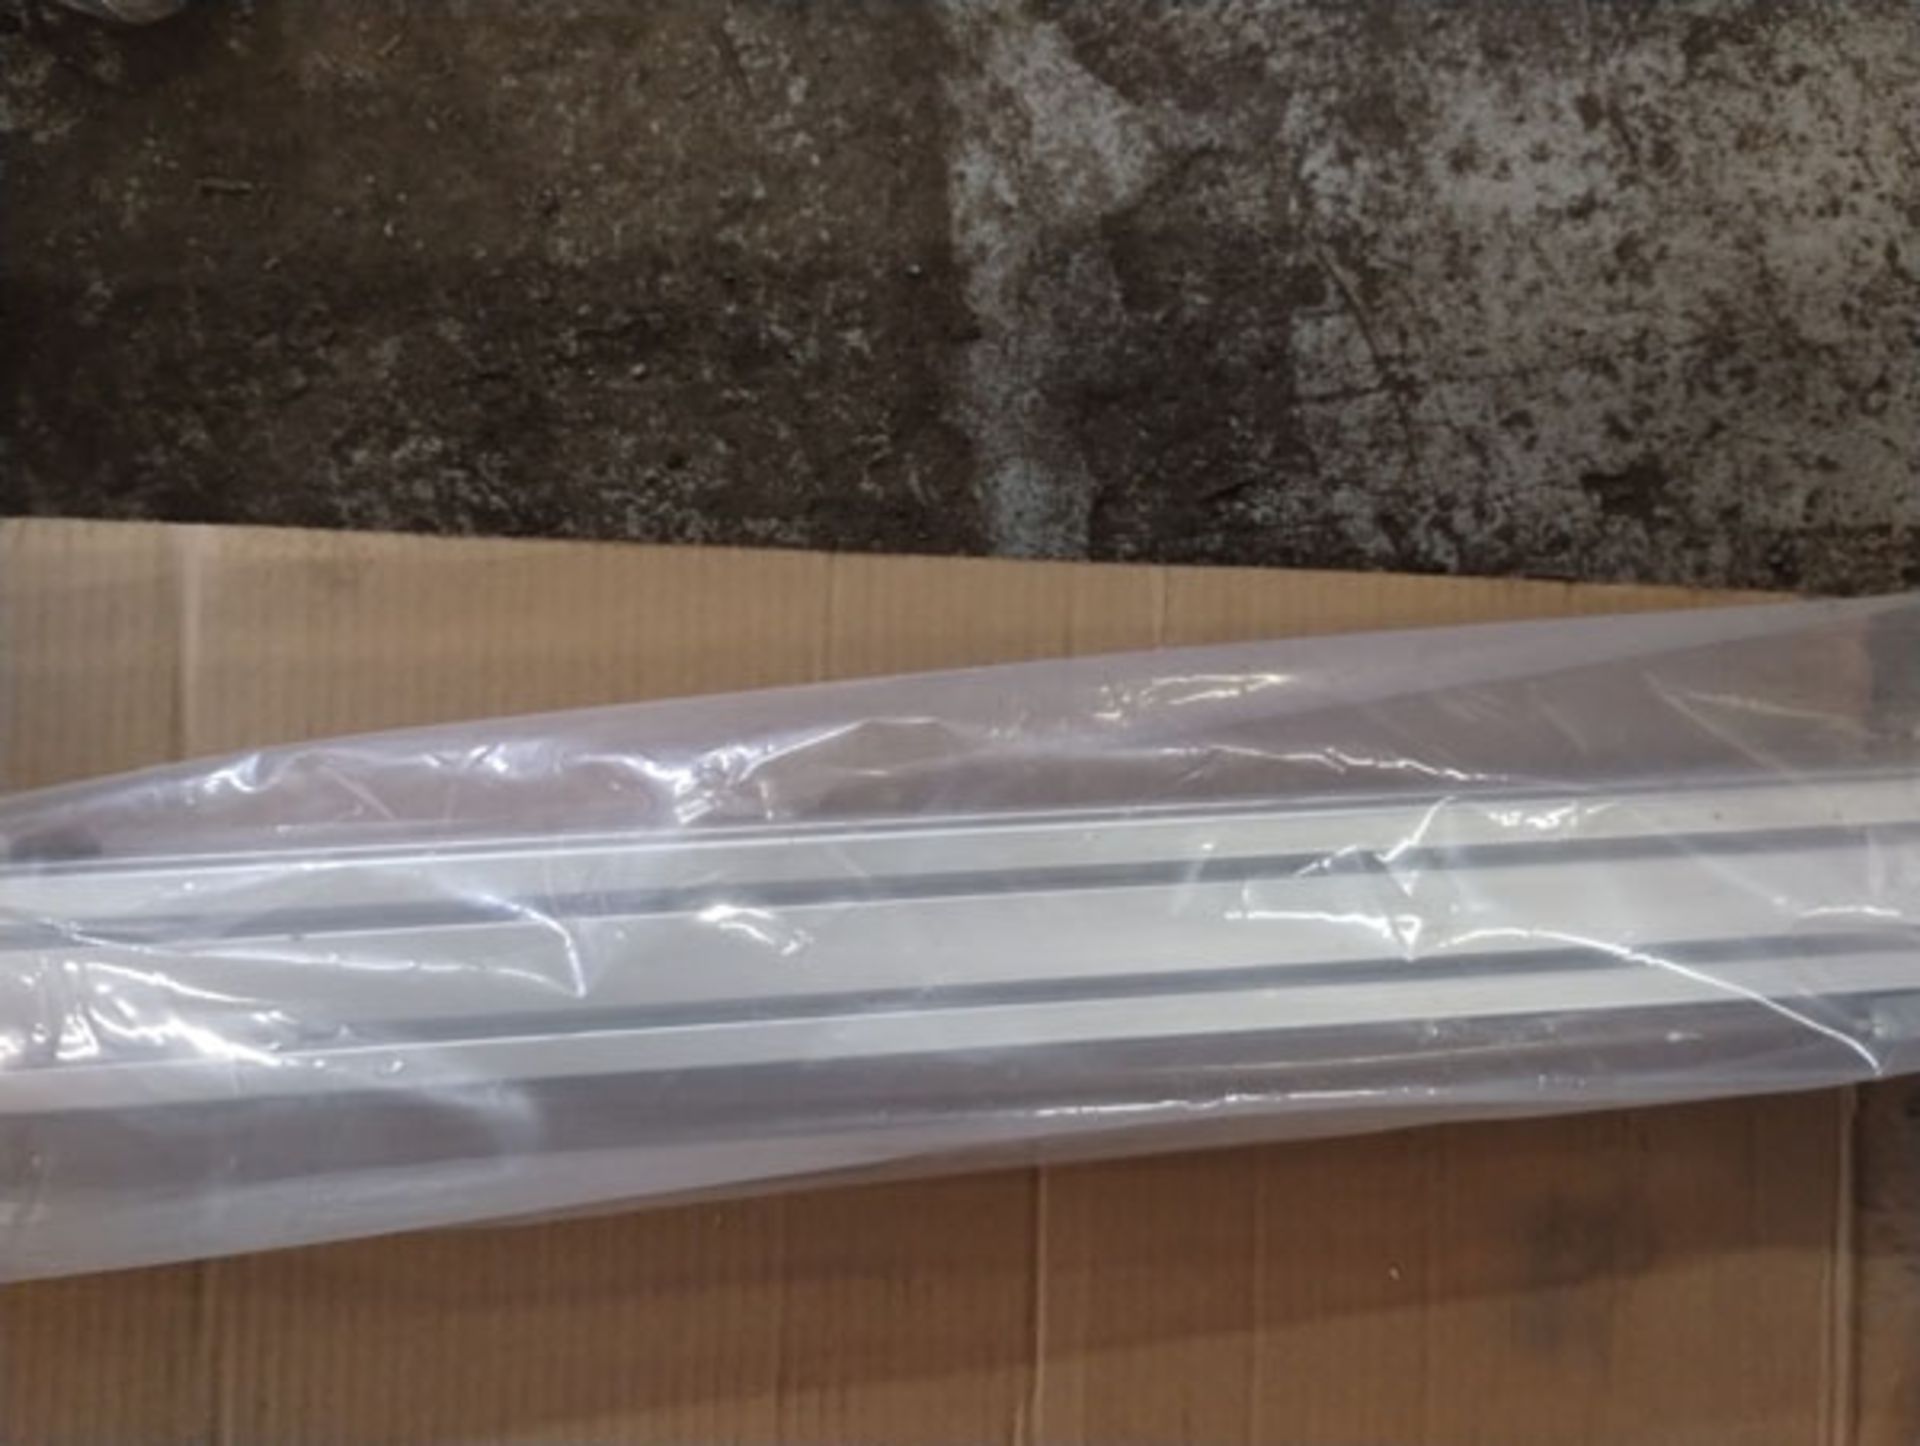 70" LINEAR ACTUATOR PART# 10764A01 -- Lot located at second location: 6800 Union ave. , Cleveland - Image 8 of 9